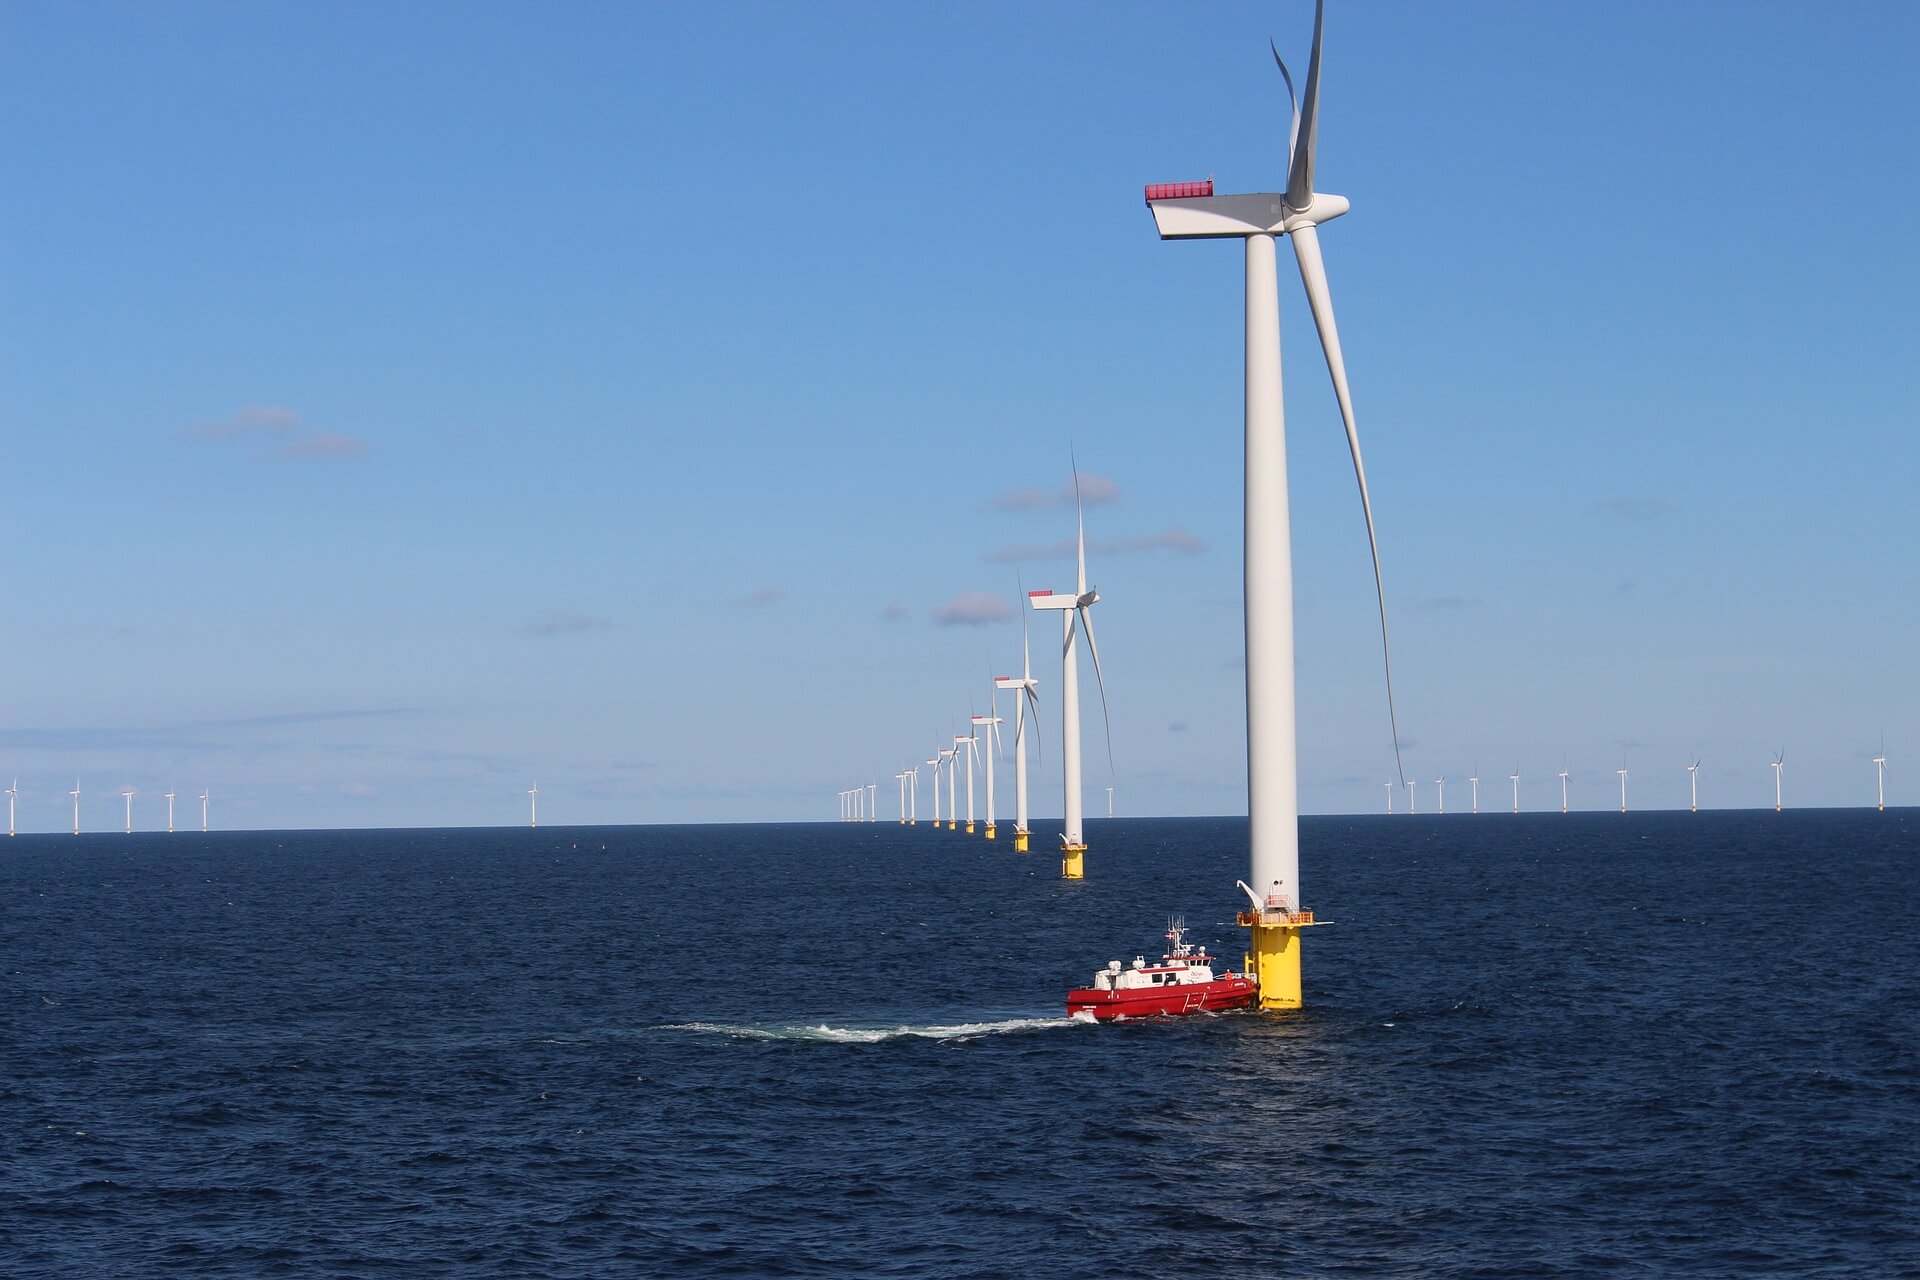 According to the Department of Energy, the U.S. offshore wind project pipeline in the United States has reached a total of 25,464 MW of capacity across 13 states, including the 30 MW Block Island Wind Farm off the coast of Rhode Island.